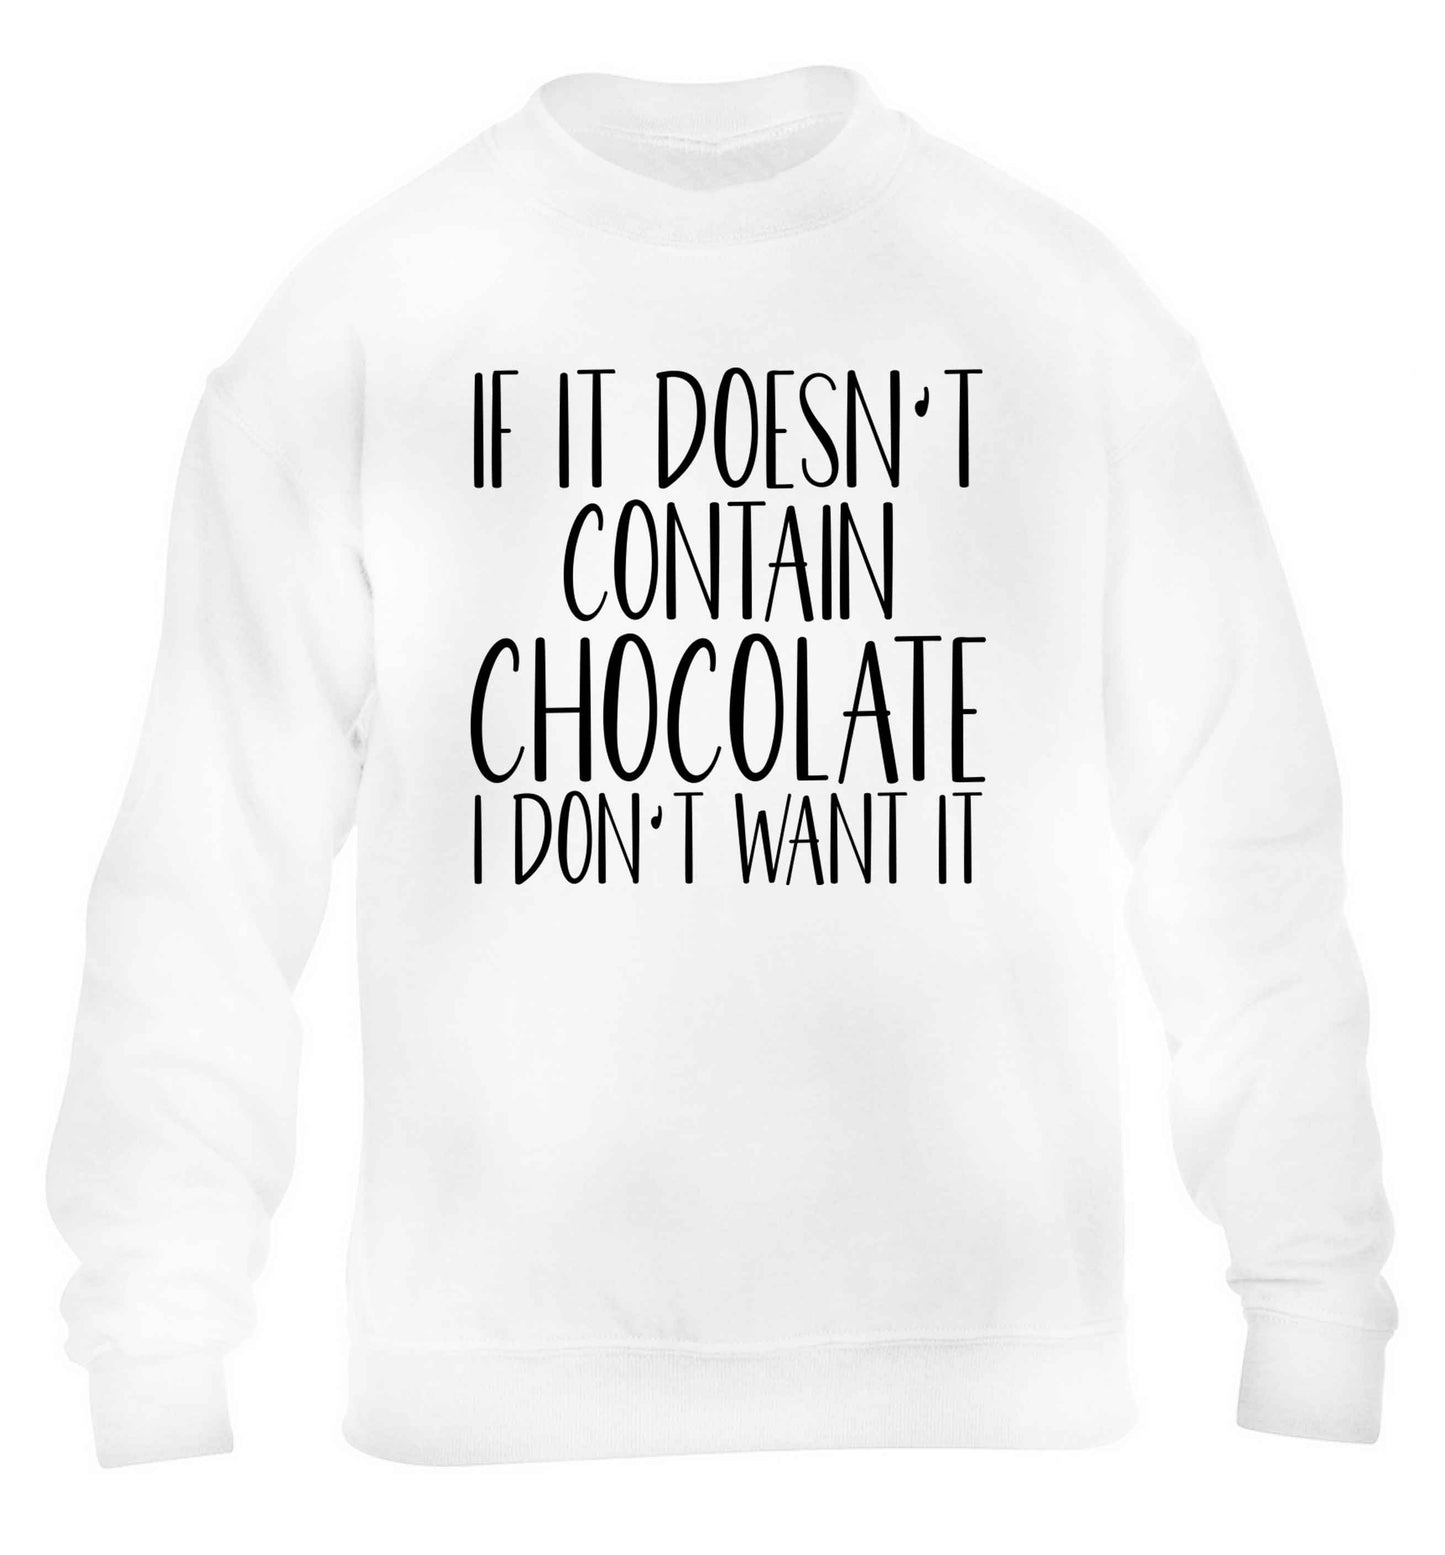 If it doesn't contain chocolate I don't want it children's white sweater 12-13 Years